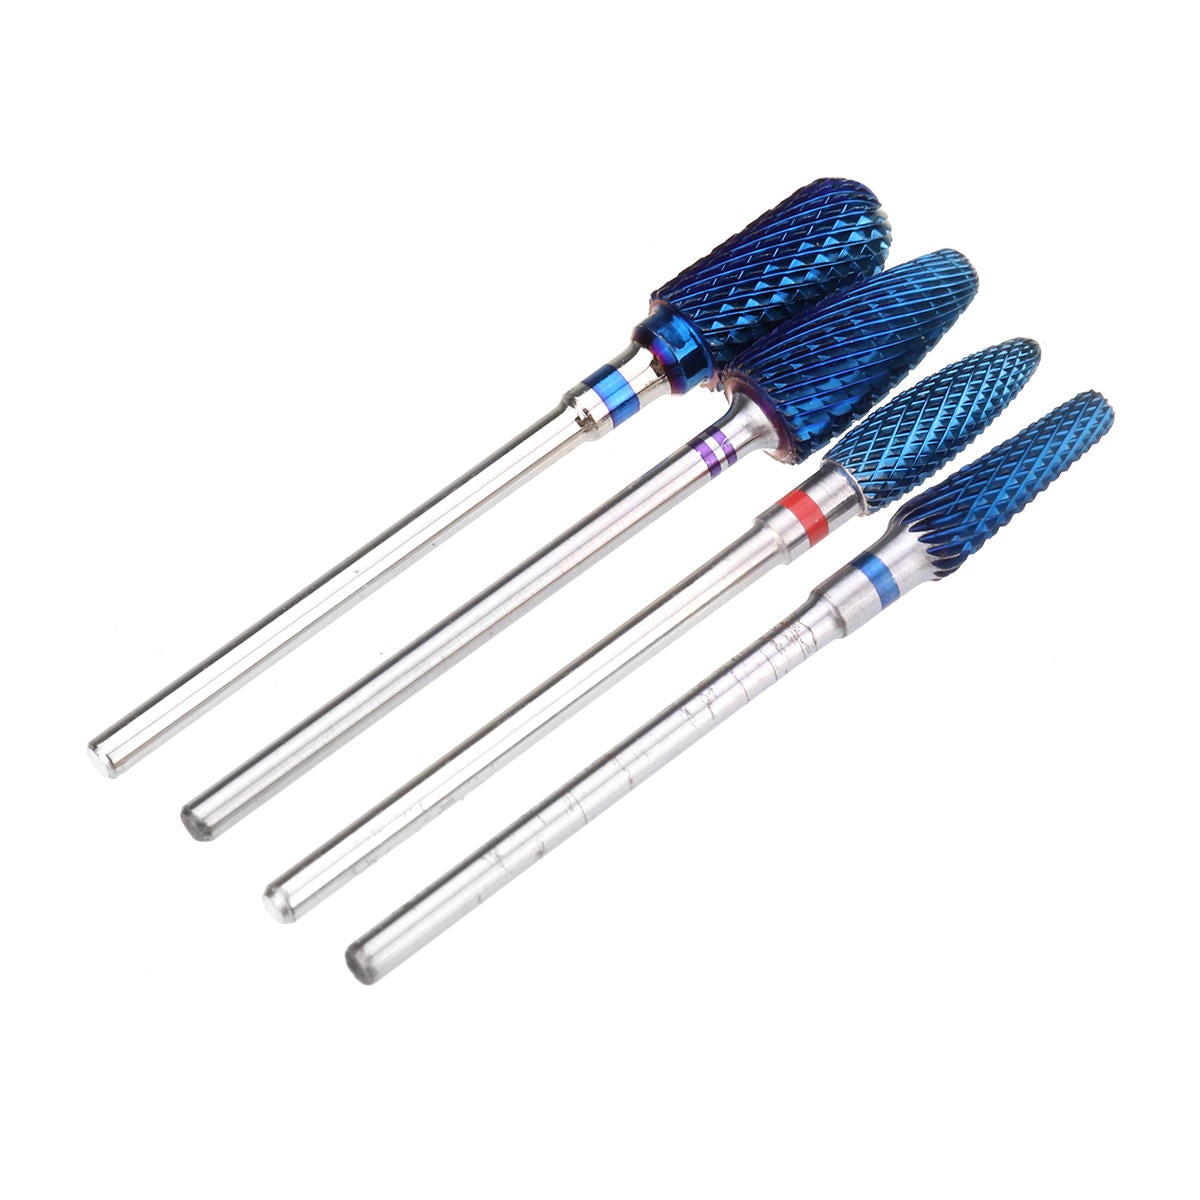 4pcs Blue Tungsten Steel Nail Drill Bits Grinding Head Carbide Burrs for Electric Manicure Machine